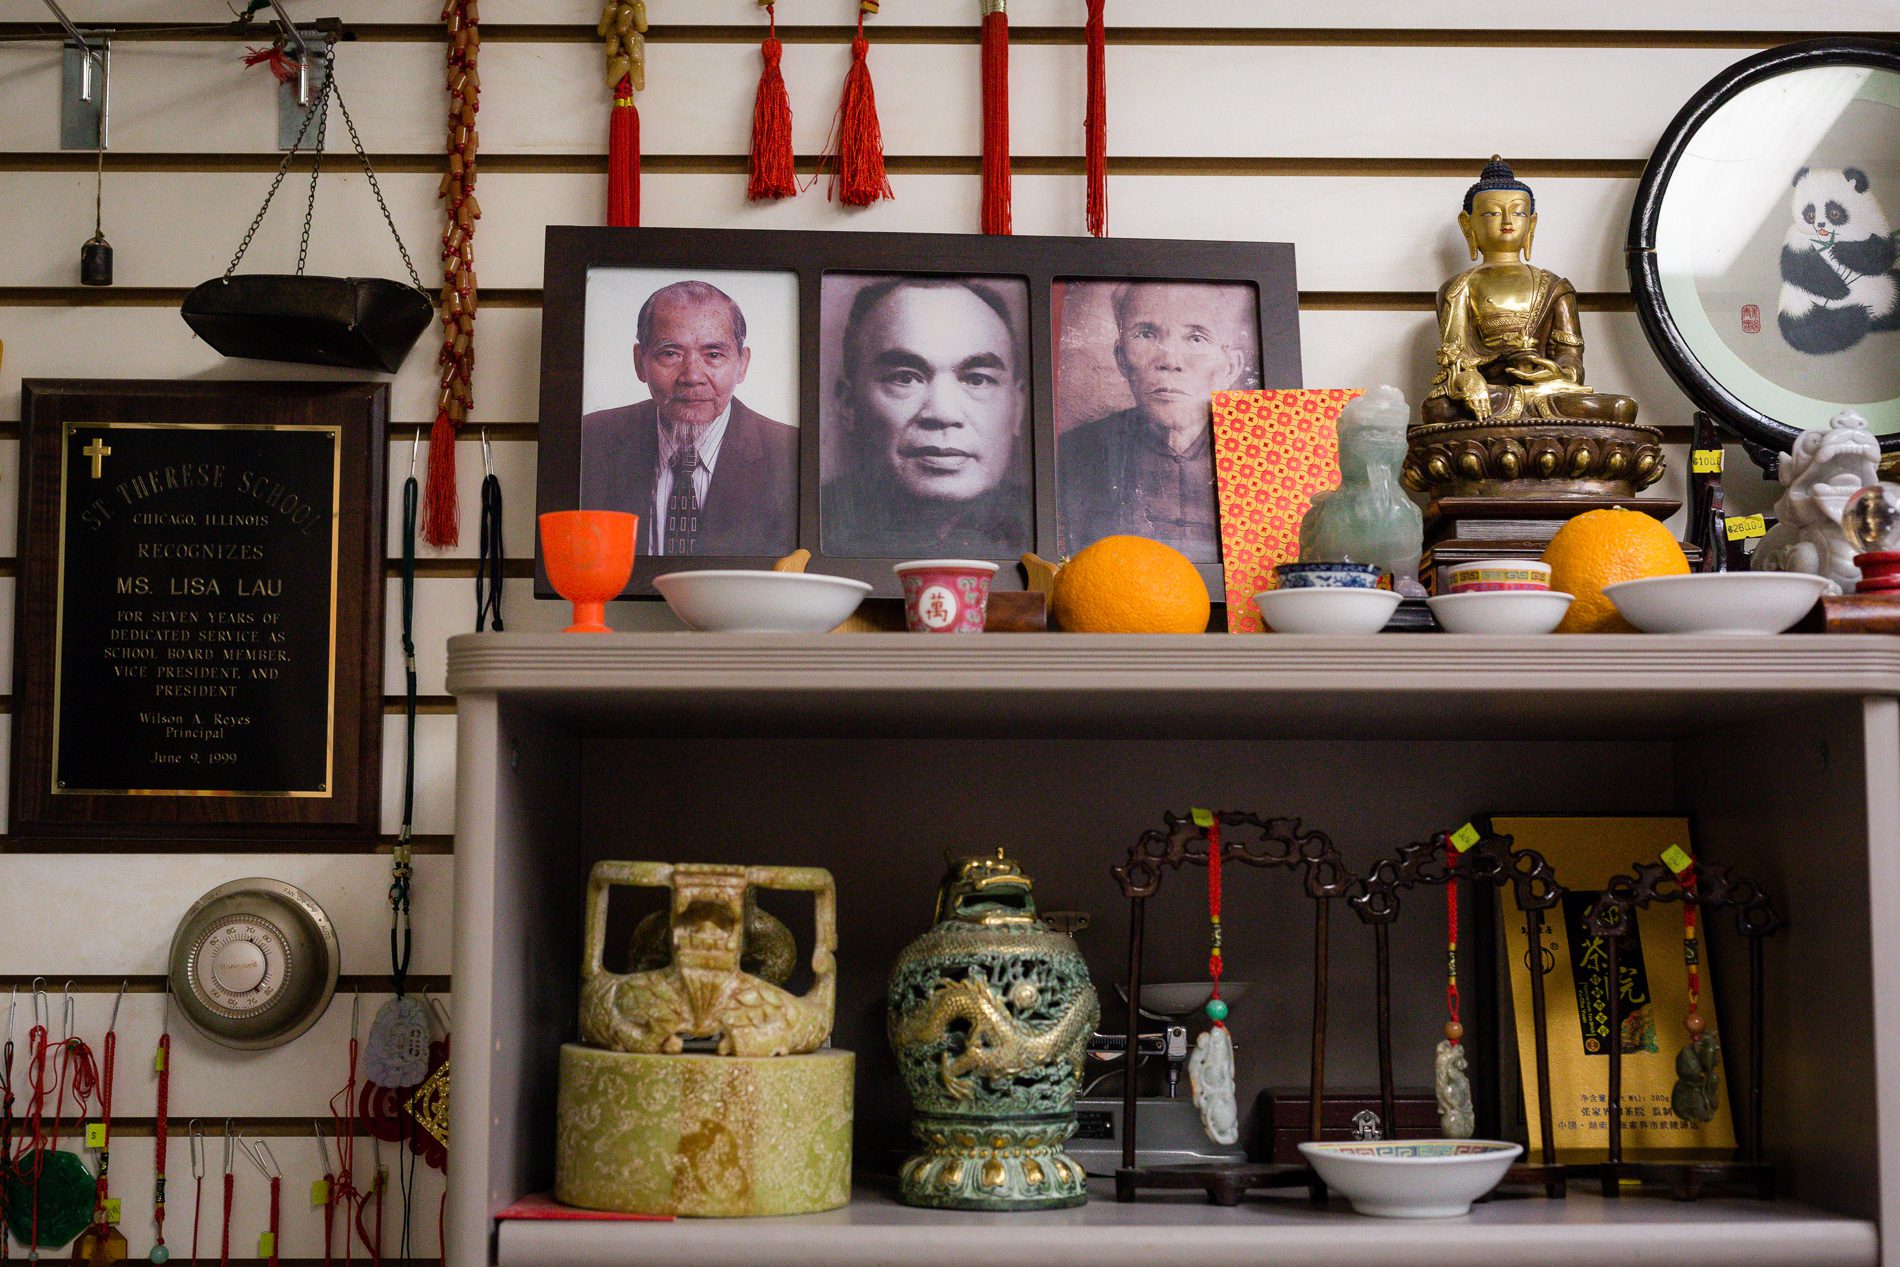 Three photos at the top of shelf showing Lisa Lau’s father, grandfather and great-grandfather